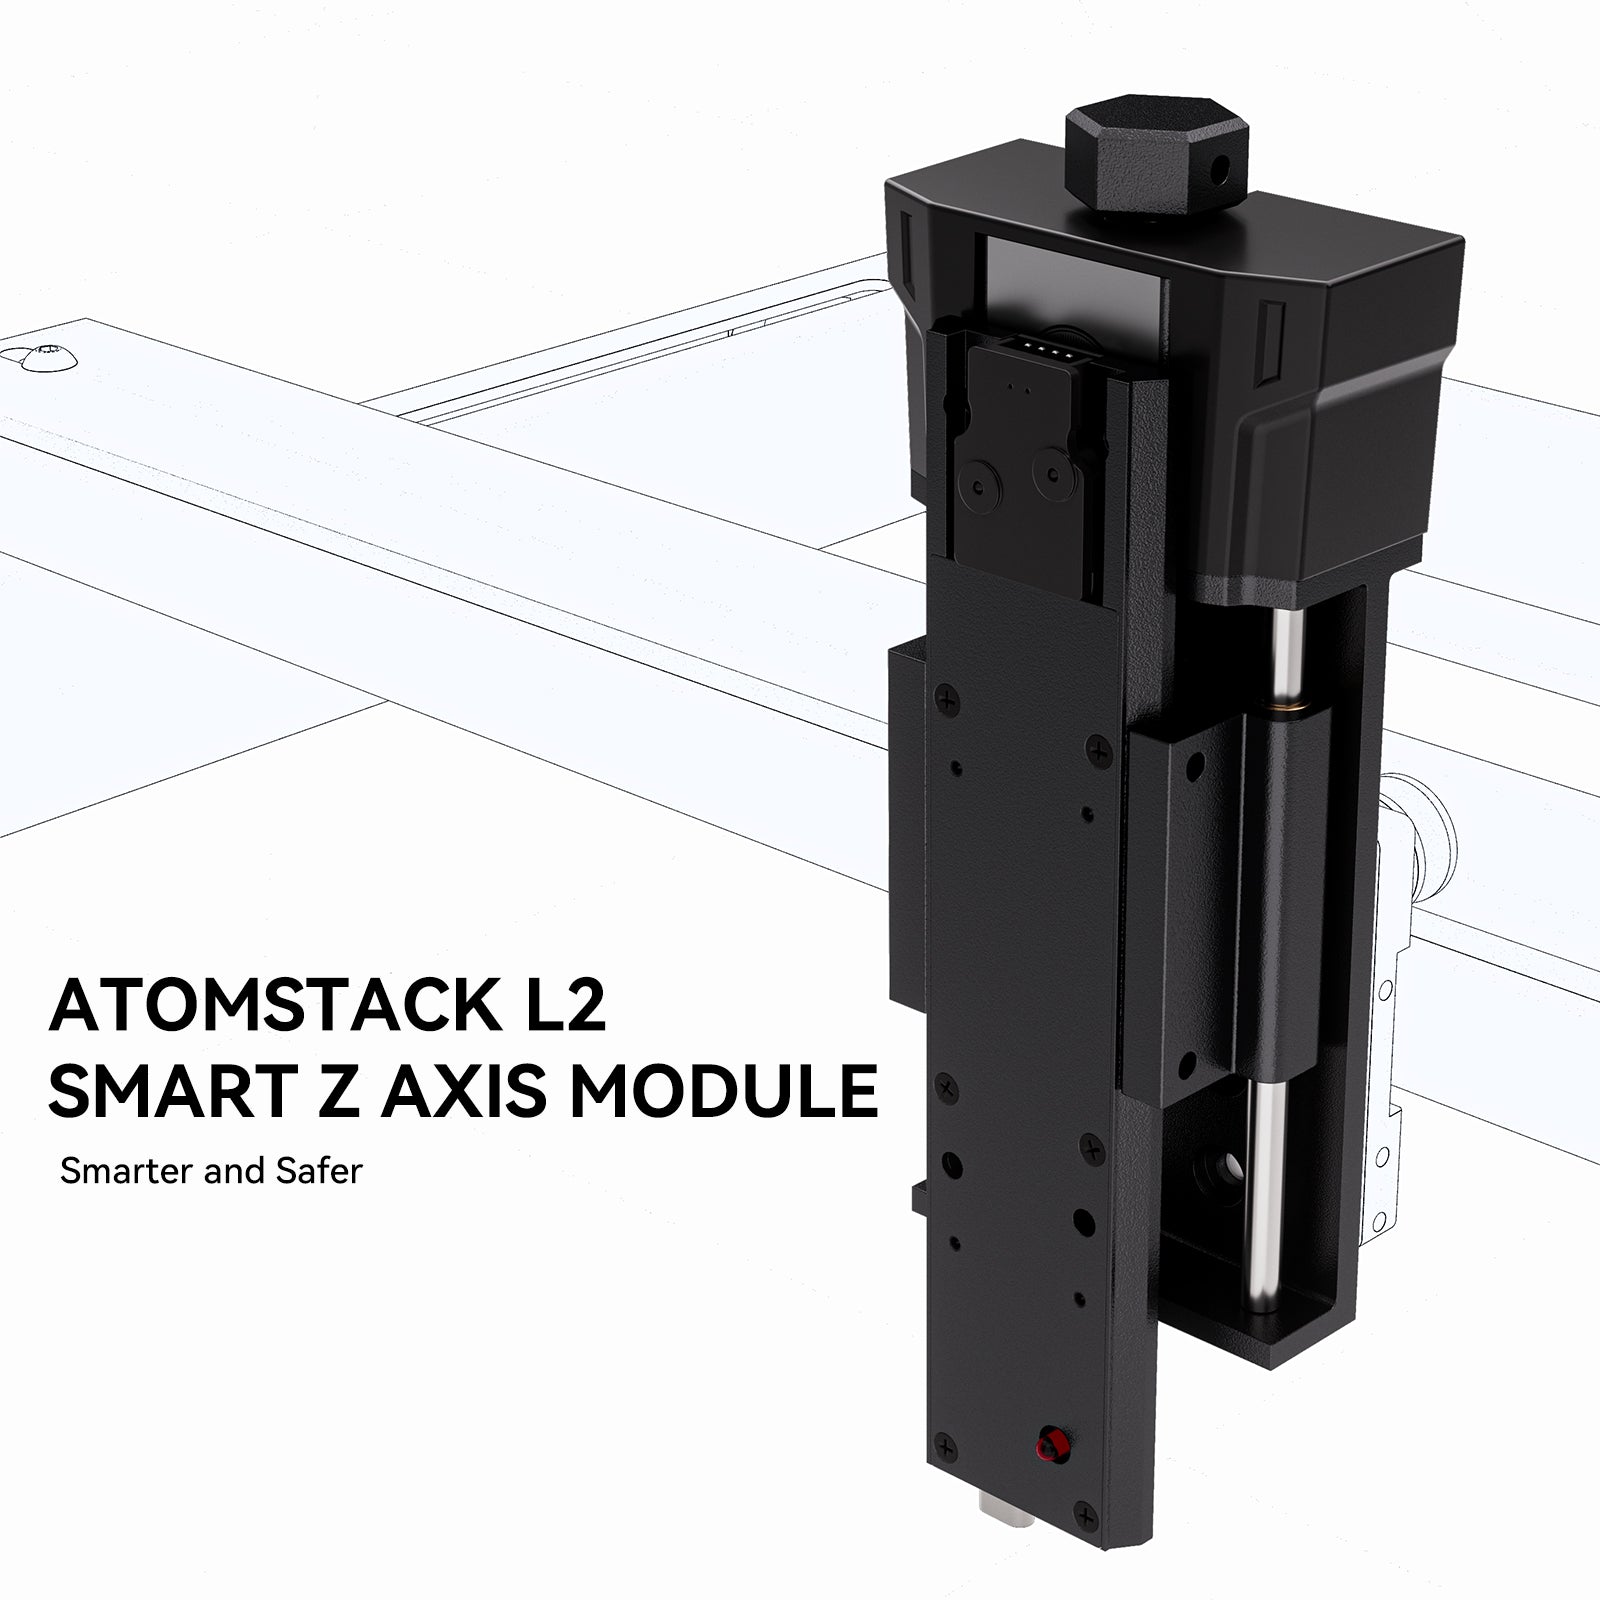 AtomStack L2 Smart Z-Axis Module Enables Automatic Focusing and Flame Detection